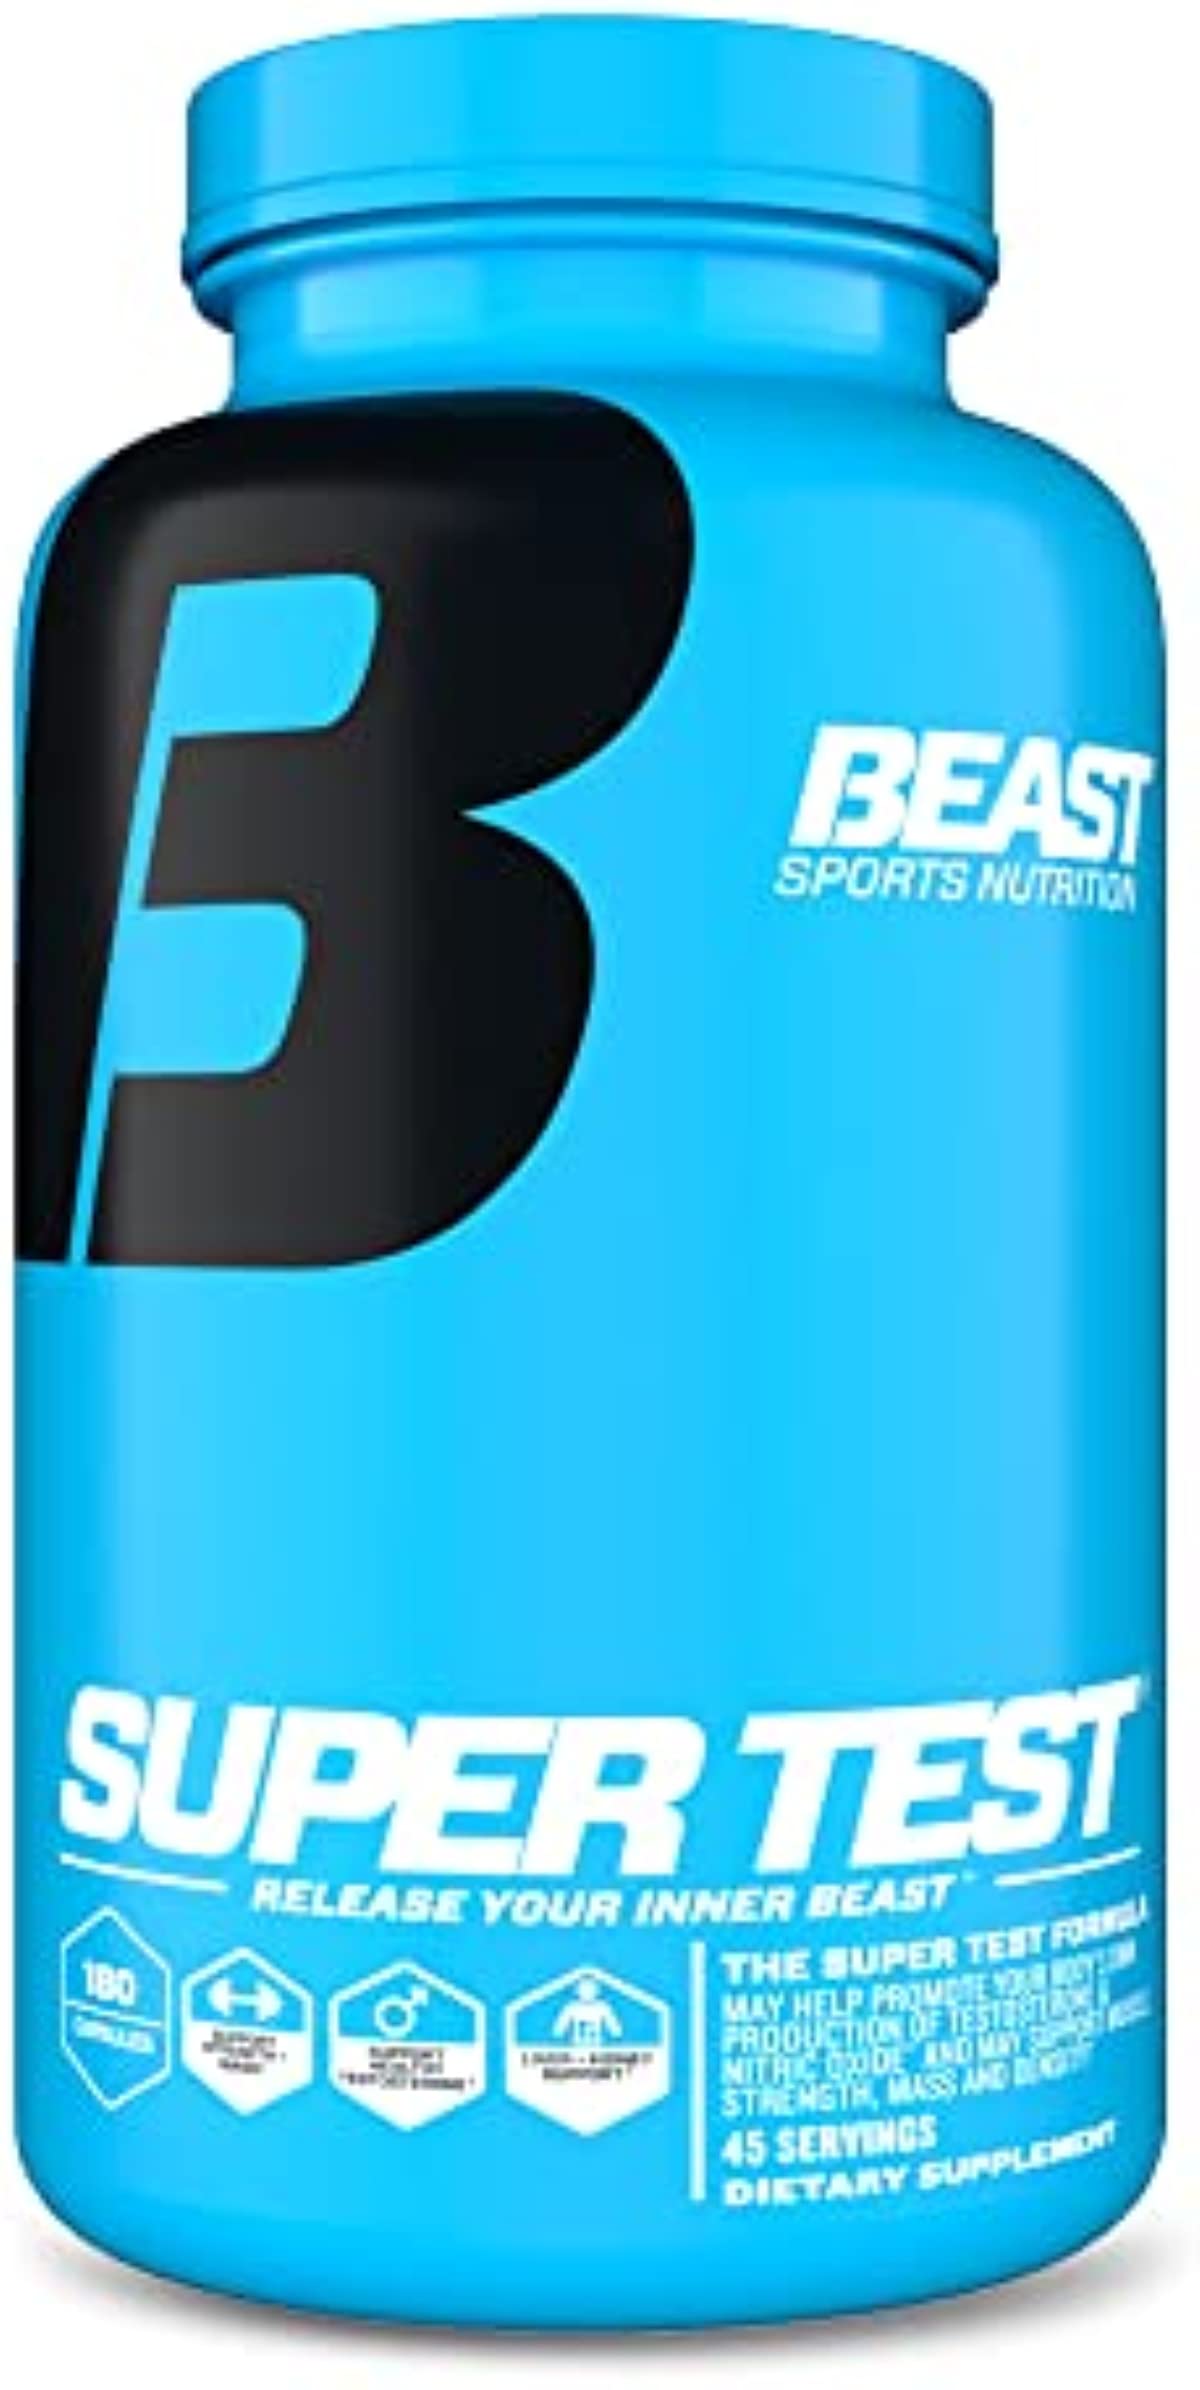 Beast Sports Nutrition Super Test - 180 Capsules - Maximize Strength, Faster Recovery & Increase Performance - 45 Servings